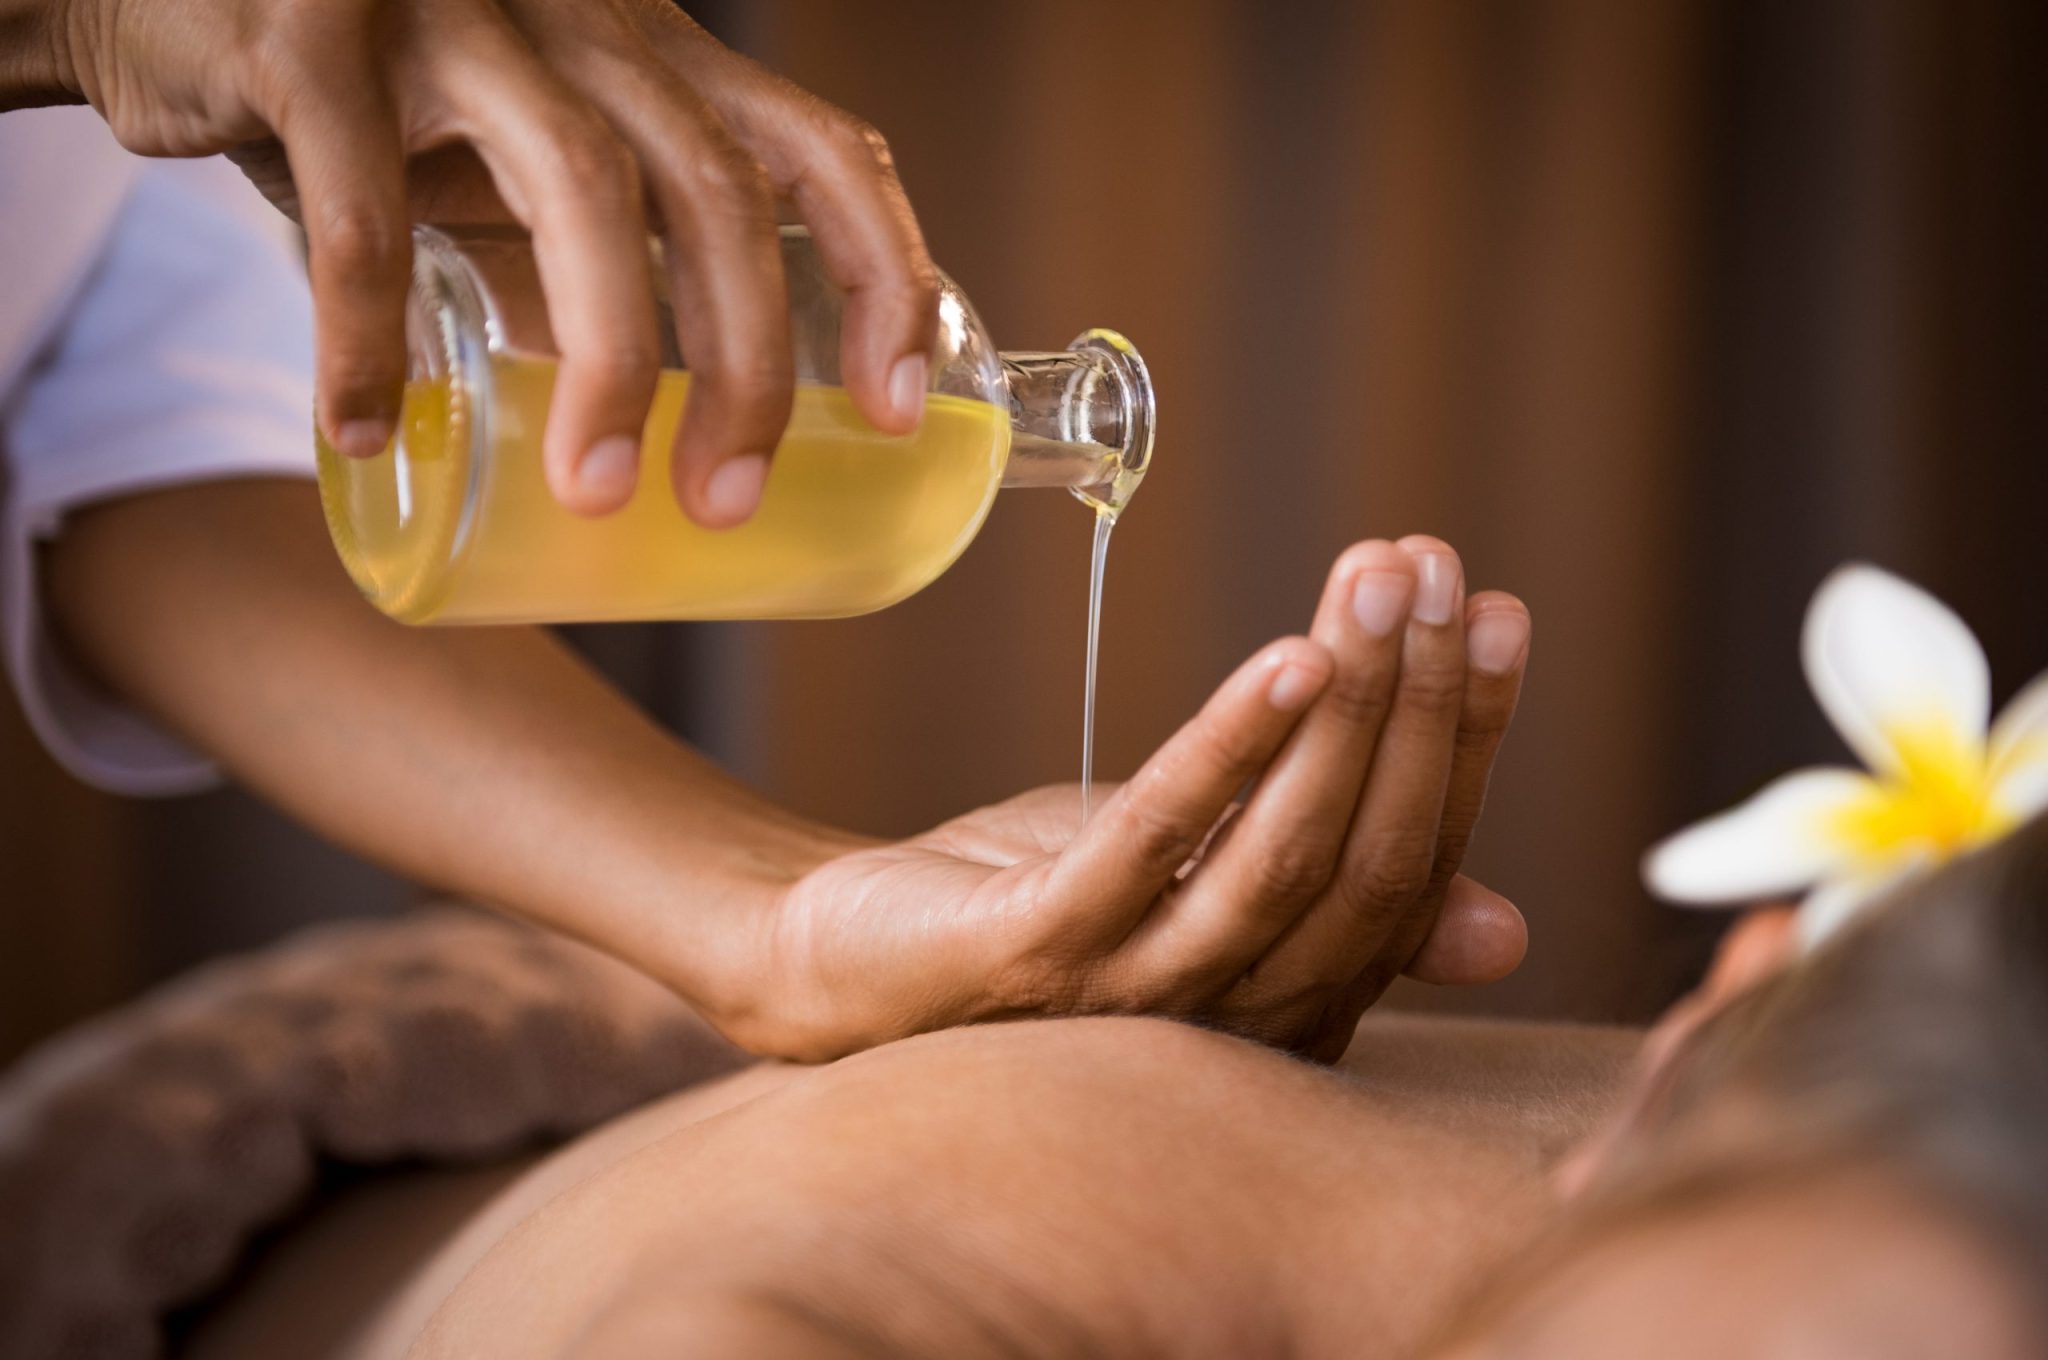 A masseuse pouring oil into her hand before an aroma massage.